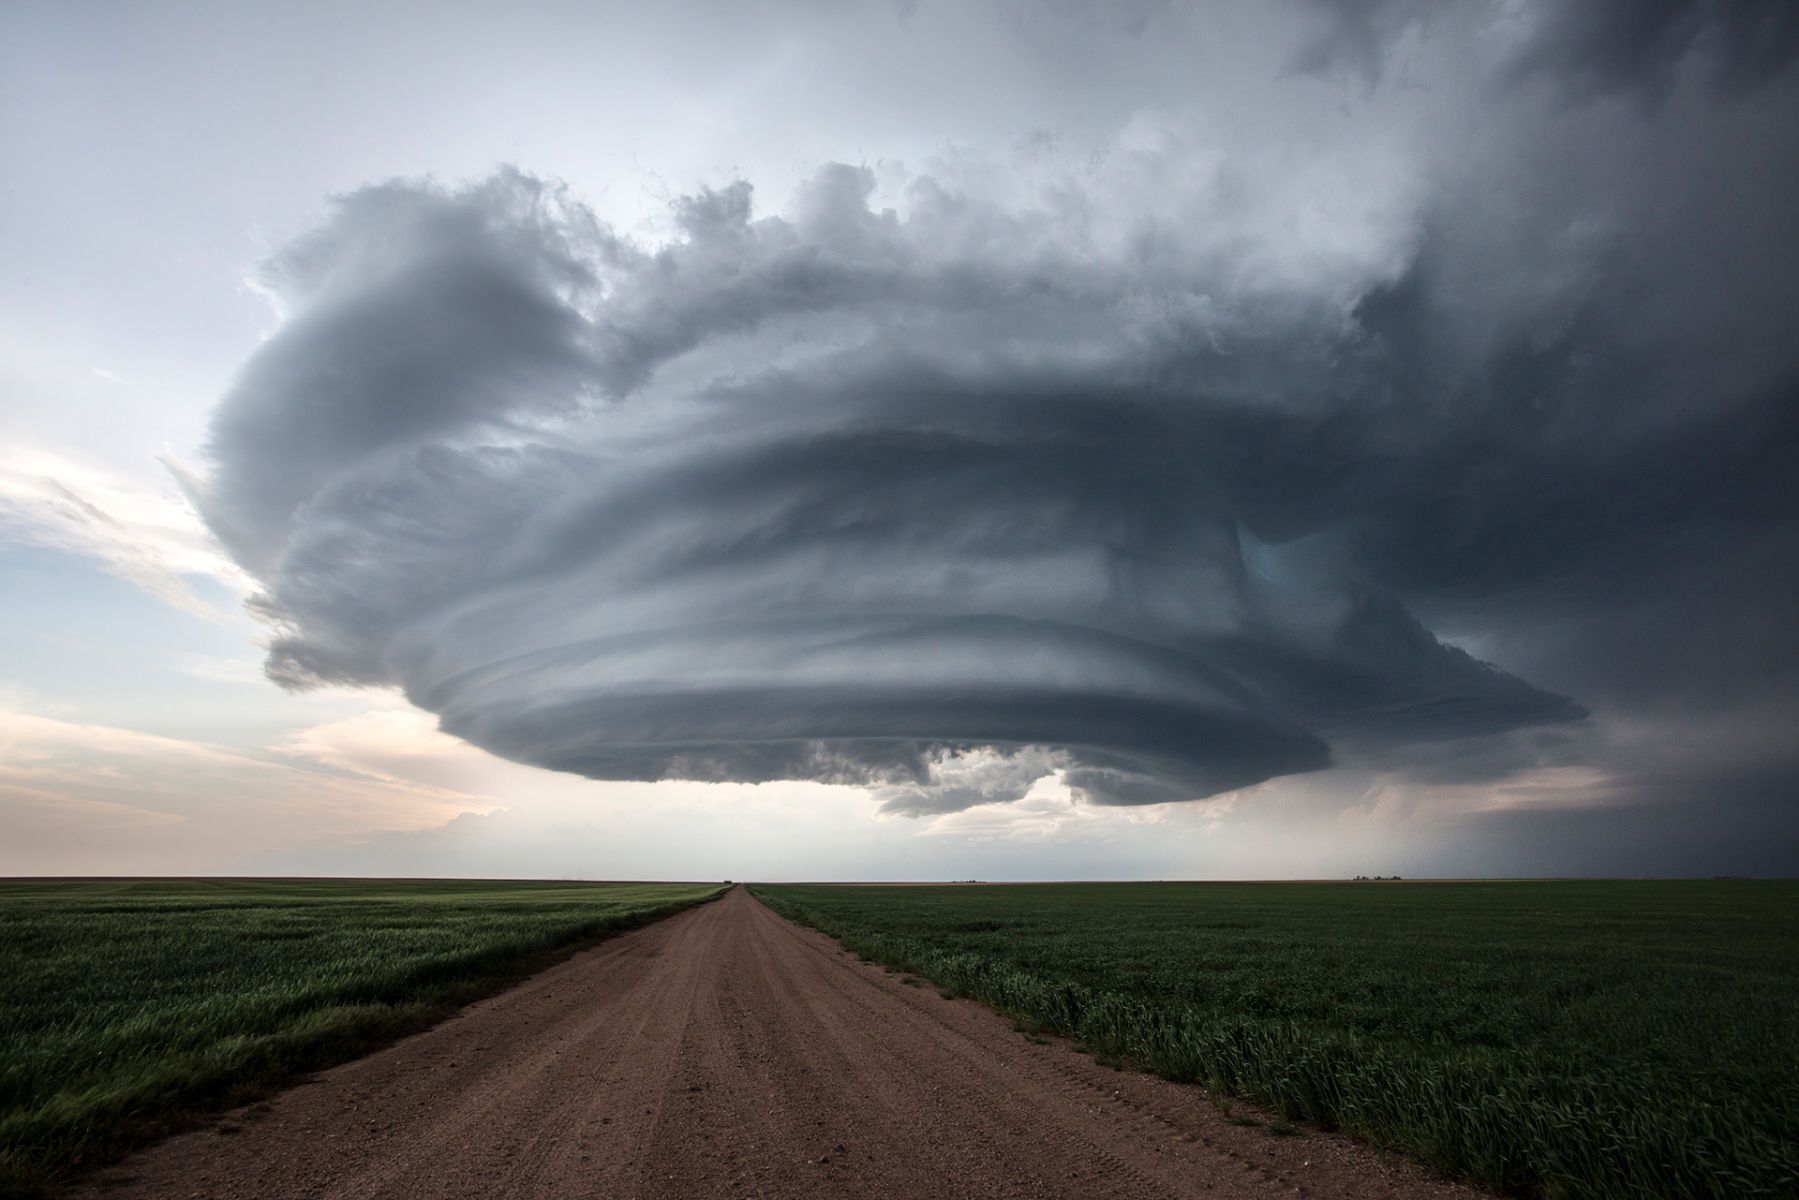 May 28, 2013 - Ovid, Colorado Supercell